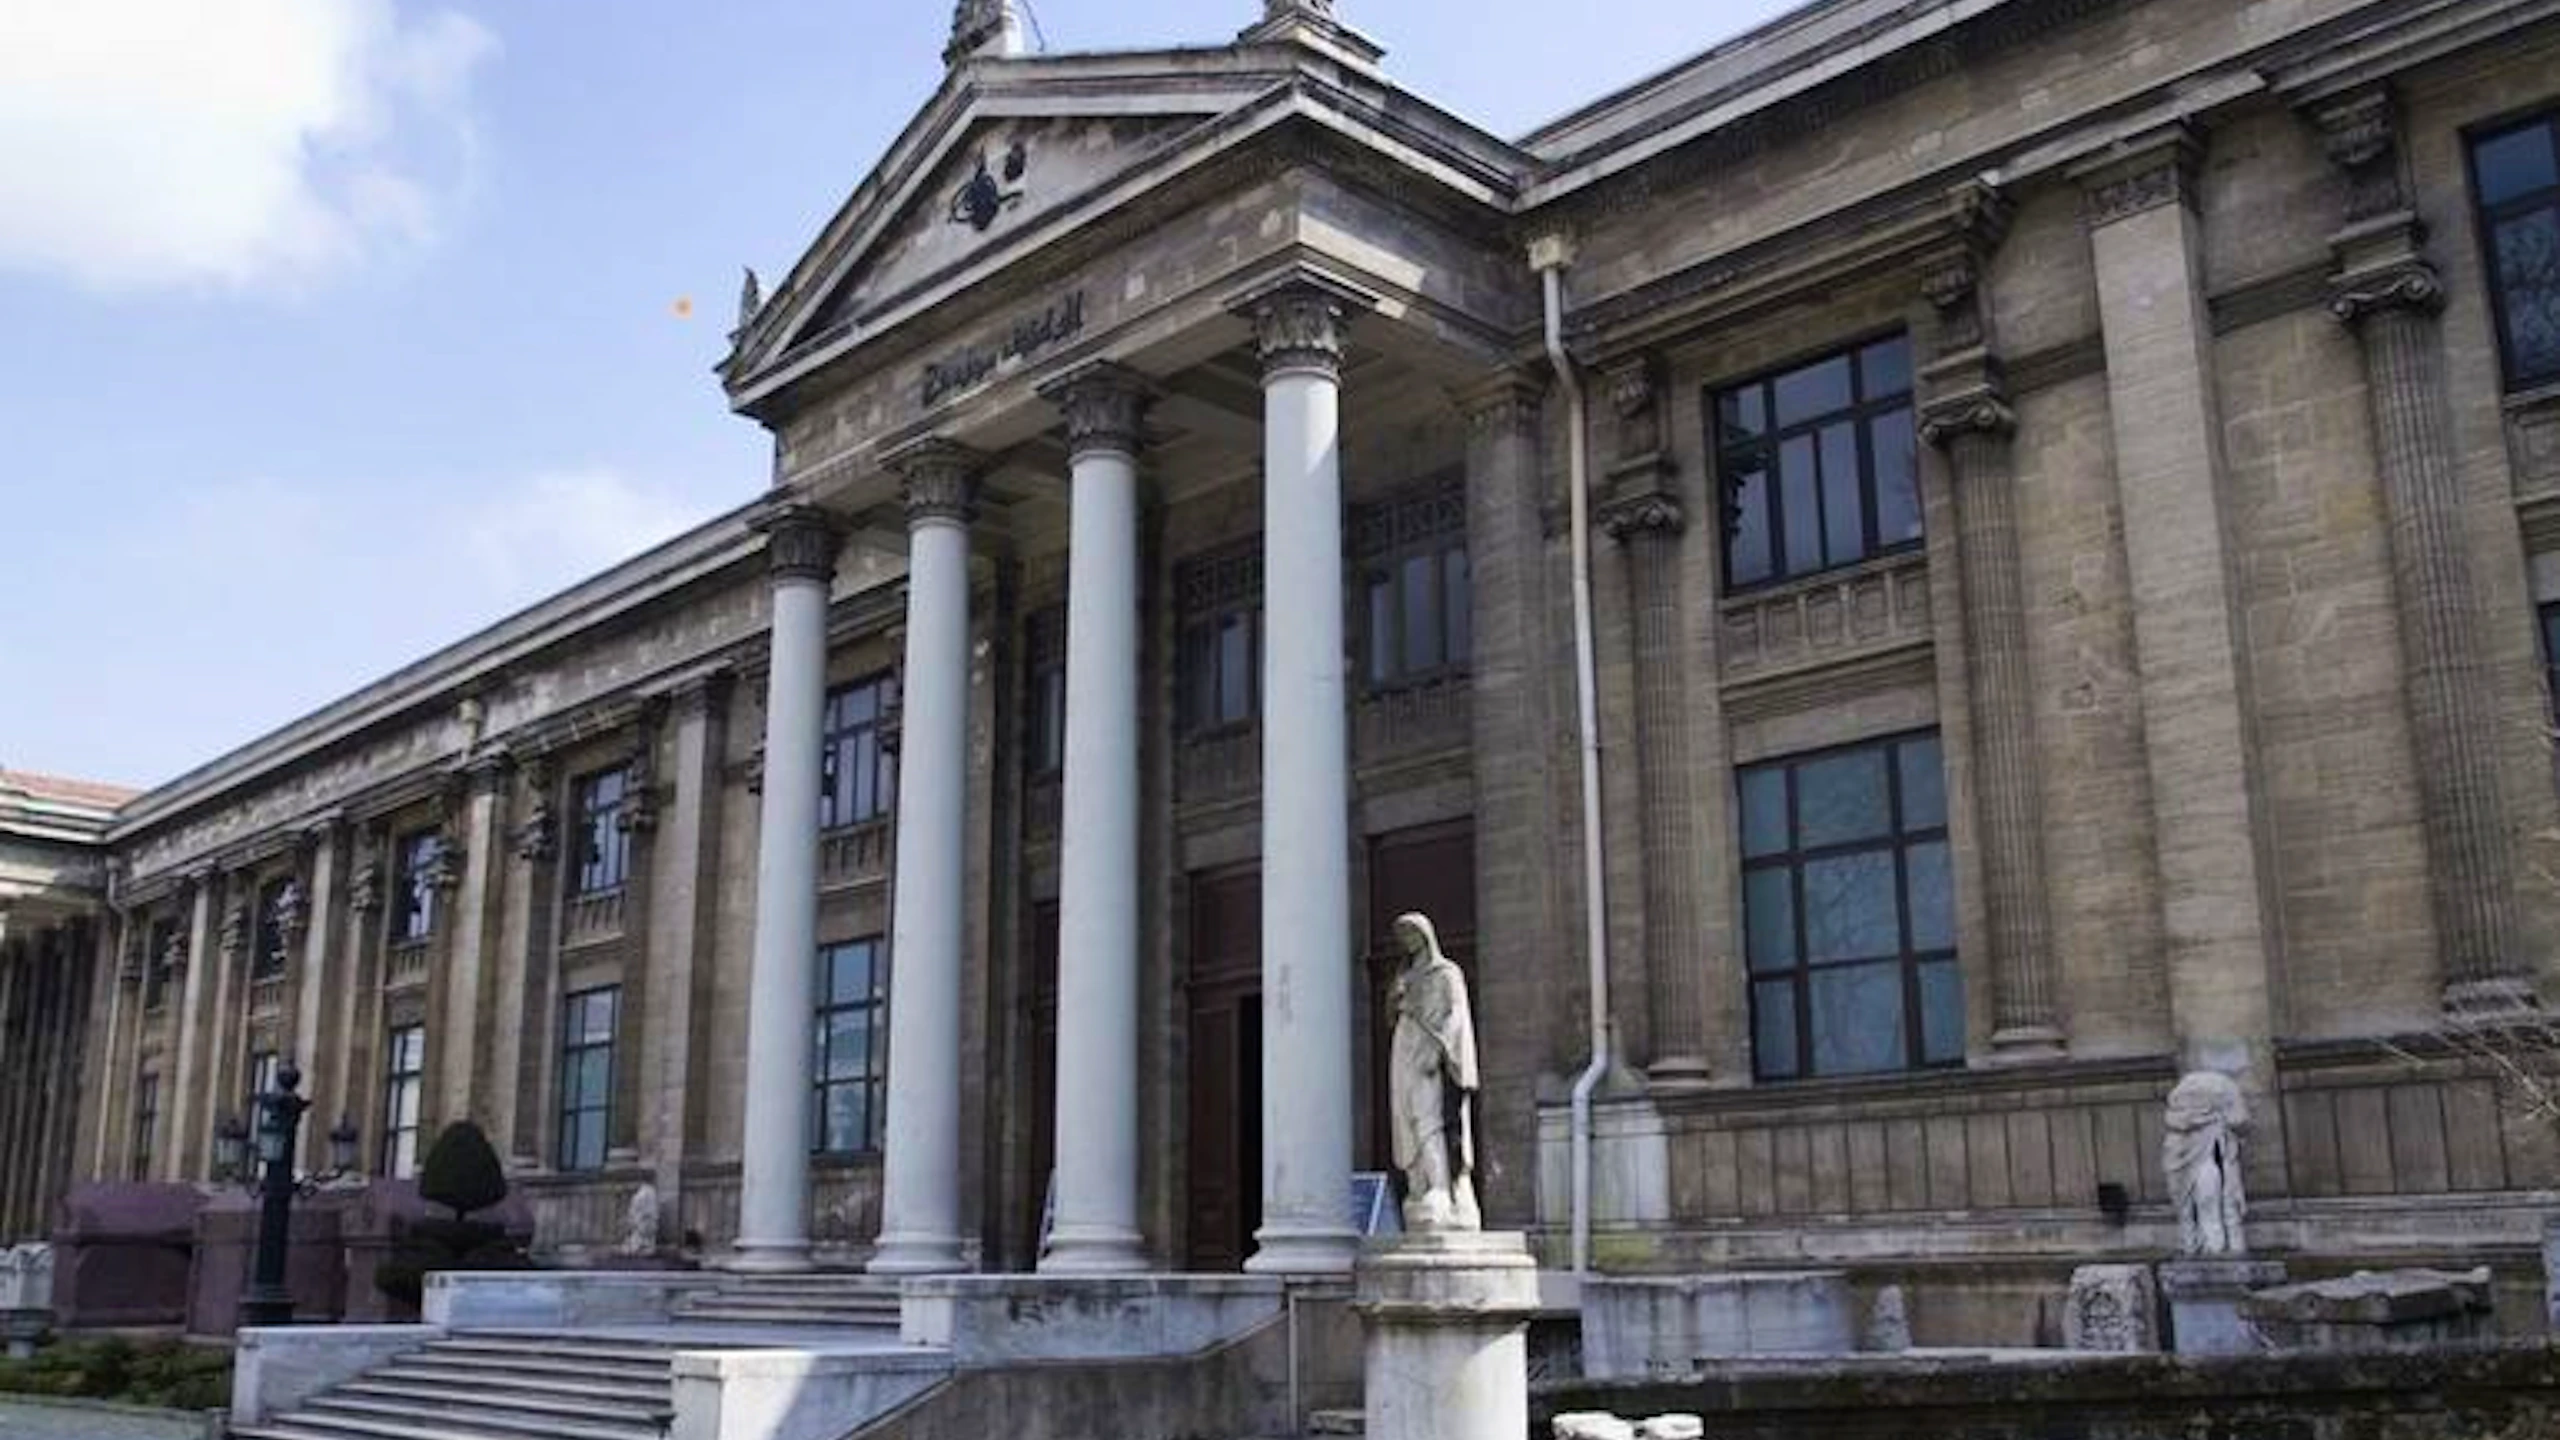 Istanbul Archaeological Museums: Entry Tickets and Guided Tour Location